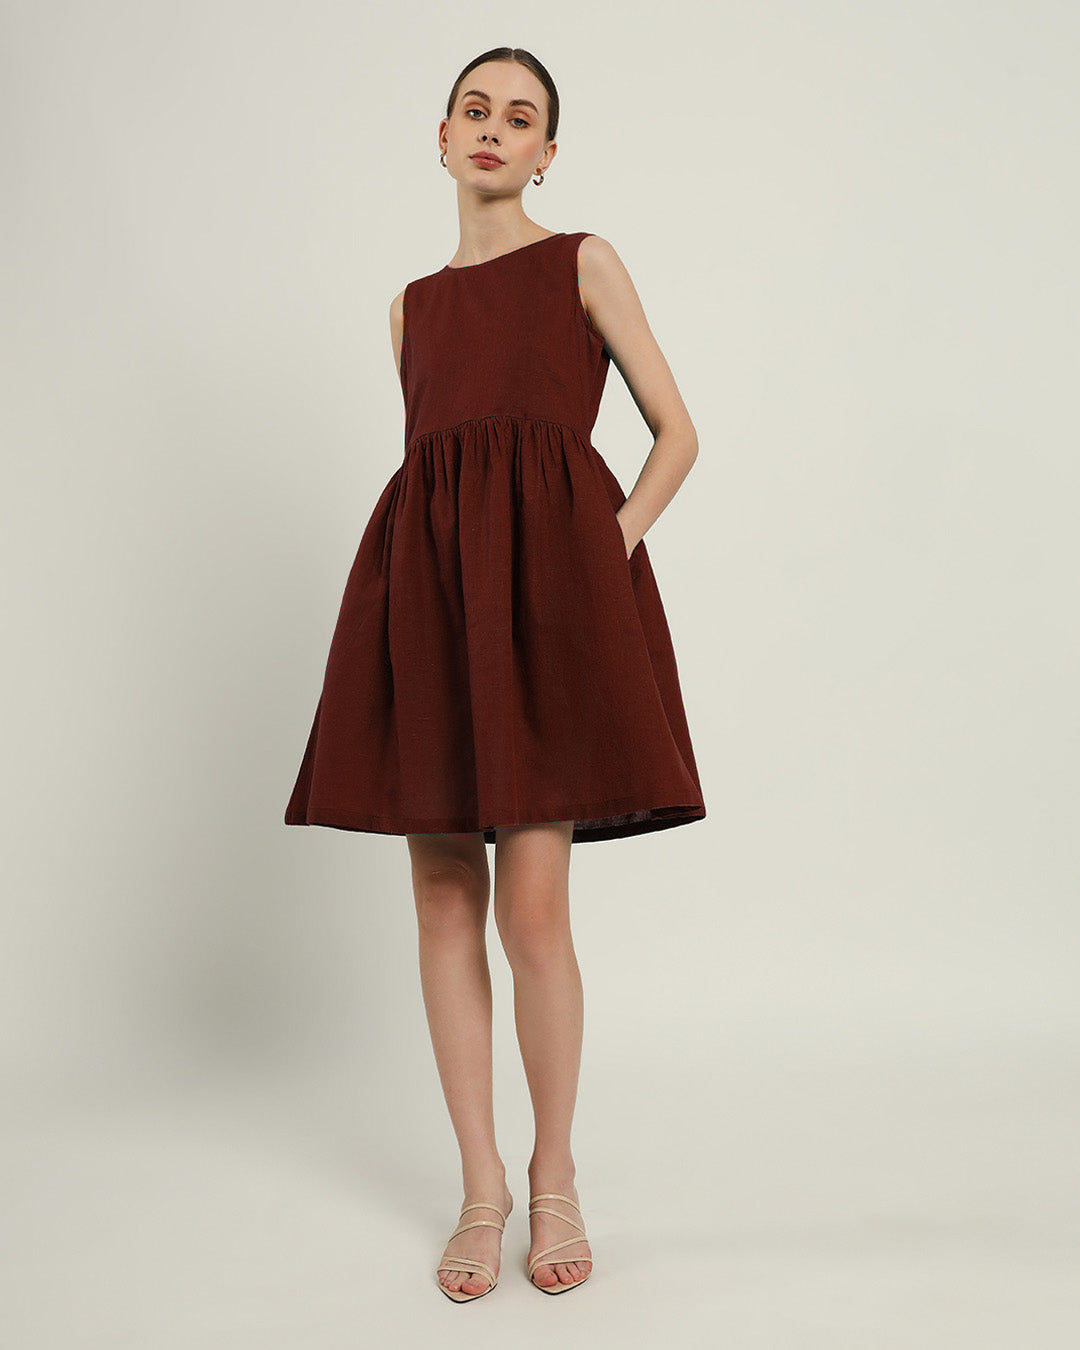 The Chania Rouge Cotton Dress